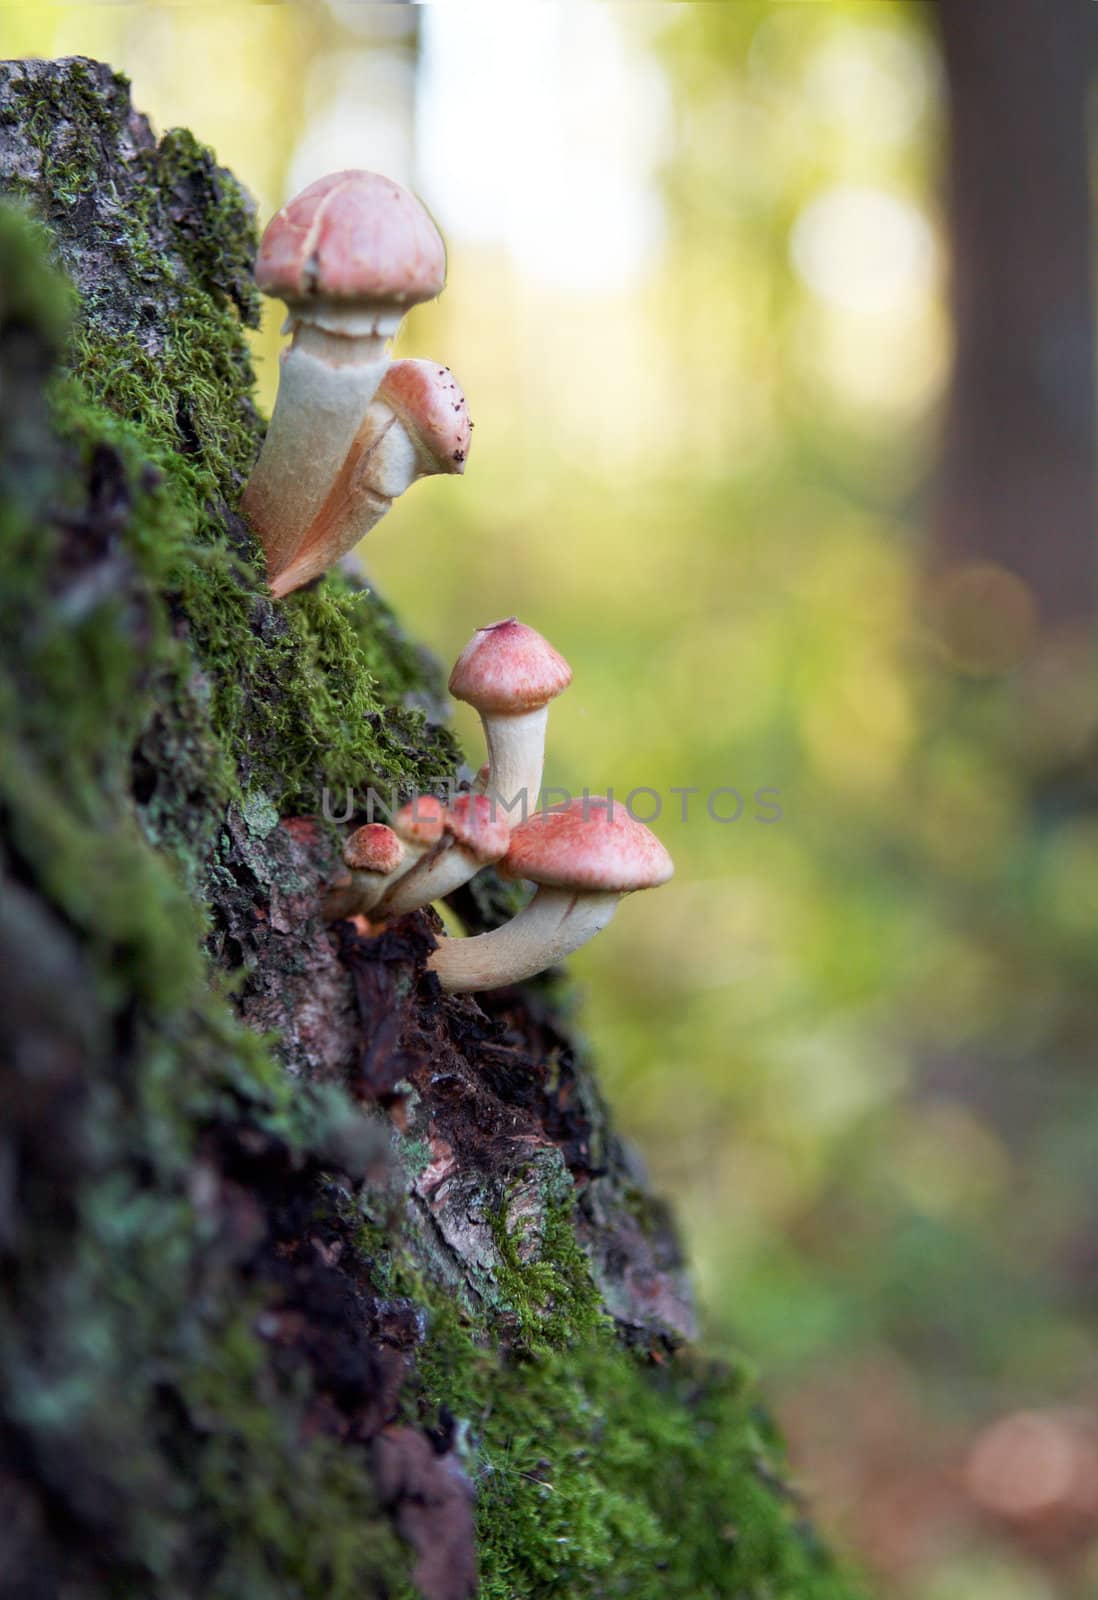 photo of mushrooms on humid forest soil- Sulphur tuft on a stub covered with moss - toadstool (Hypholoma fasciculare)